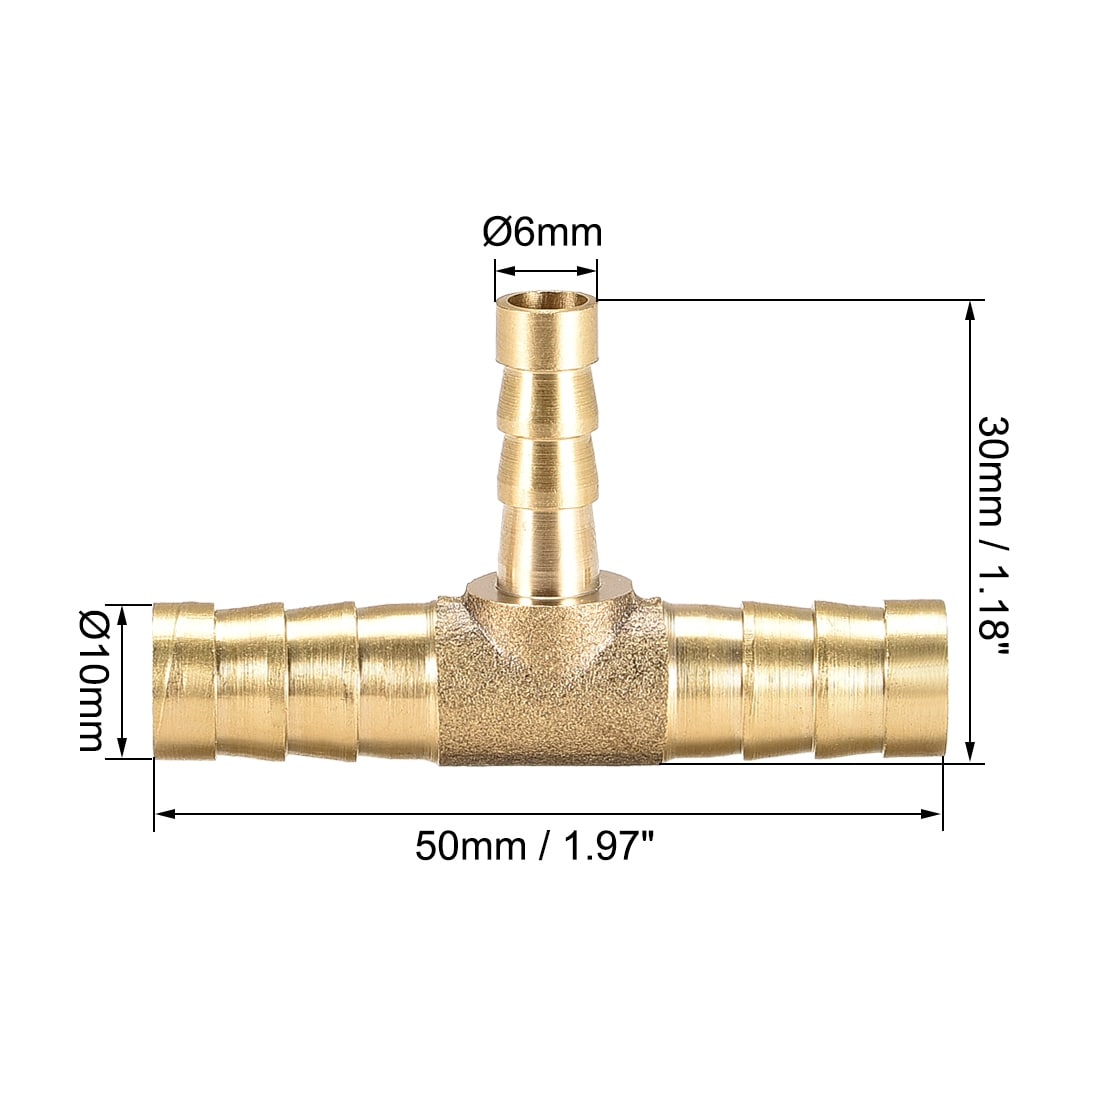 10mm x 6mm x 10mm Brass Hose Reduce Barb Fitting Tee T-Shaped 3 Way Barbed 